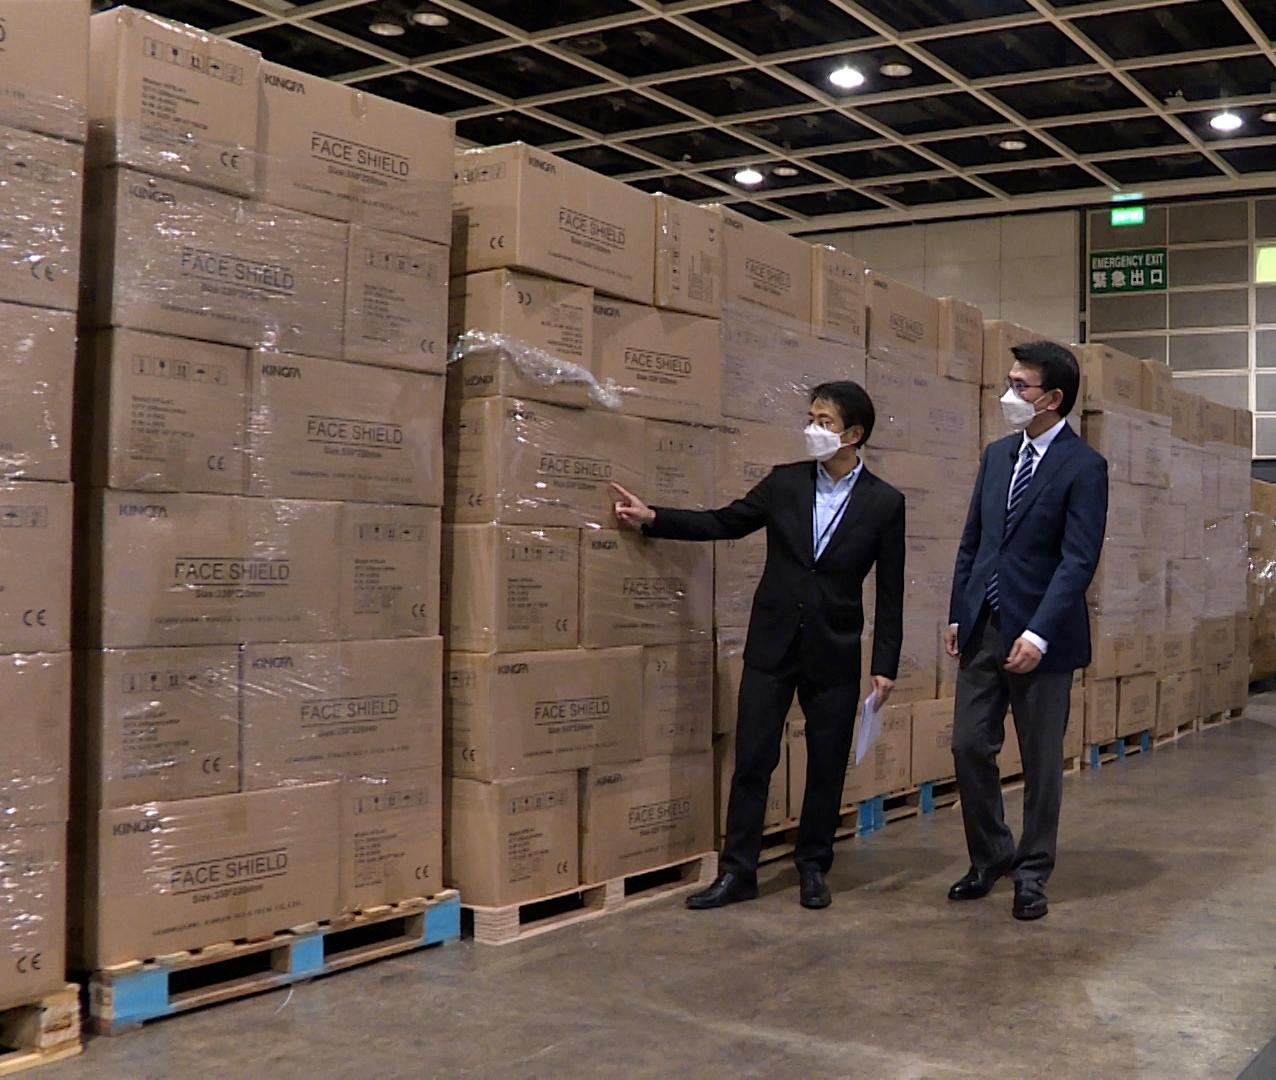 The Secretary for Commerce and Economic Development, Mr Edward Yau (right), and the Permanent Secretary for Commerce and Economic Development (Communications and Creative Industries), Mr Clement Leung, visit the Hong Kong Convention and Exhibition Centre. This is one of the places temporarily used by the Government for storage and logistics distribution of anti-epidemic medical supplies delivered to Hong Kong.